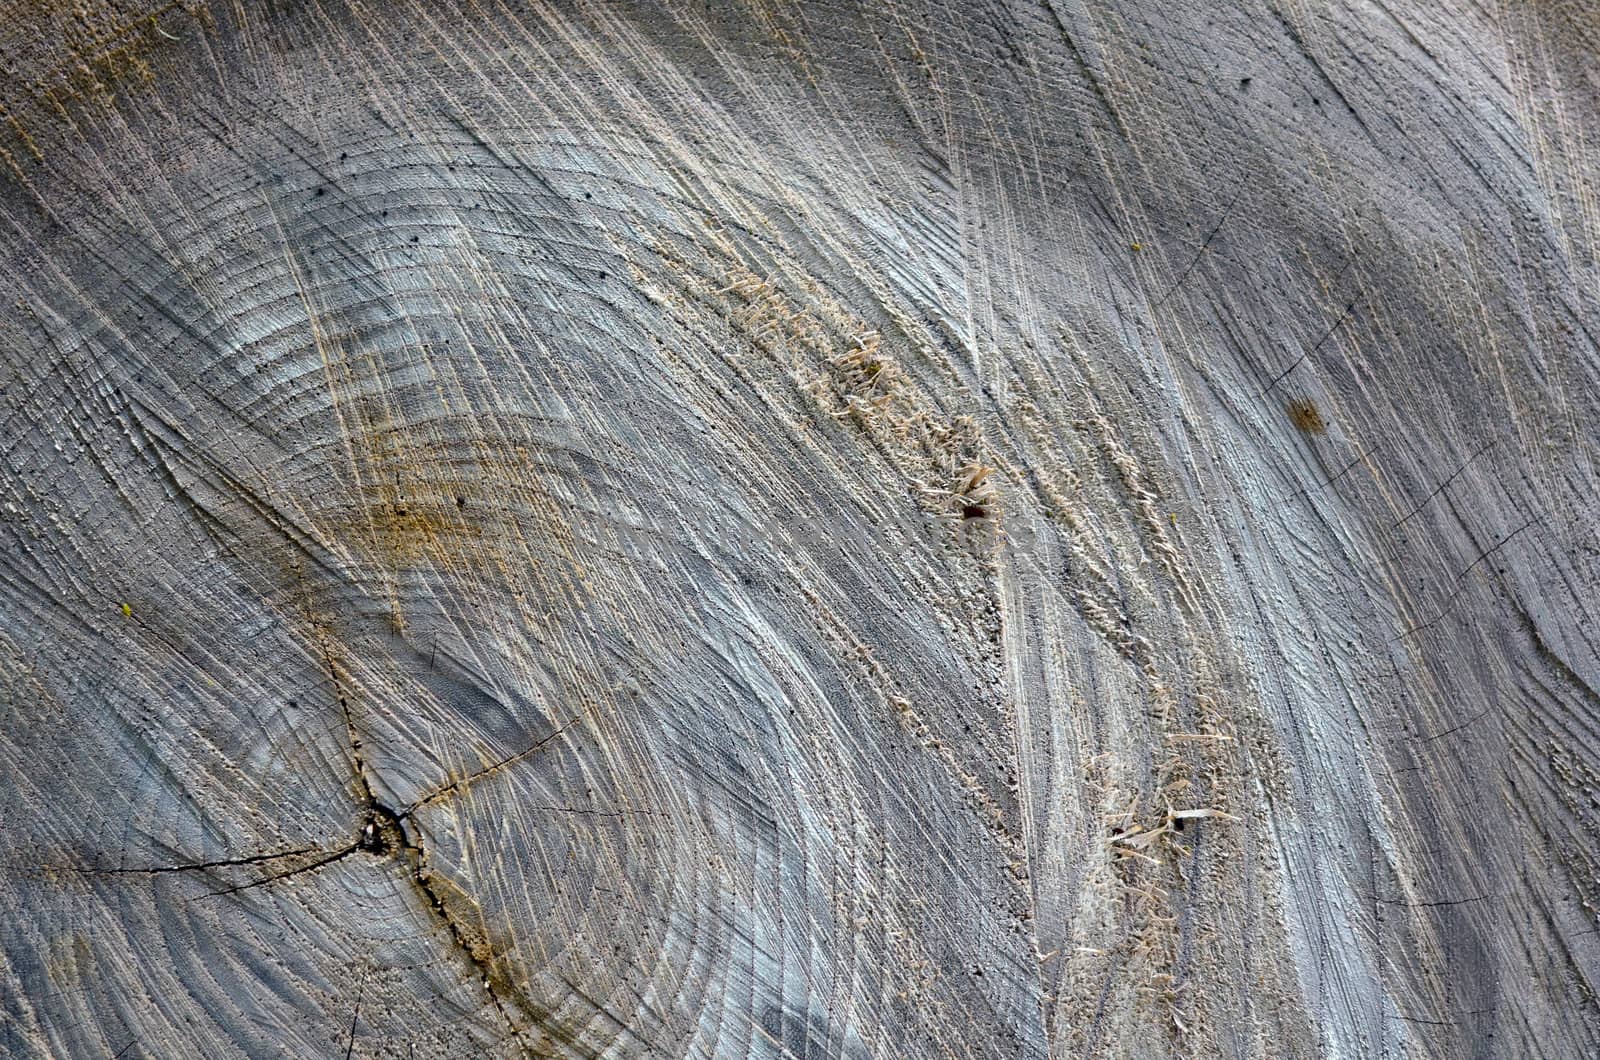 A Background Cross Section Of Some Cut Wood